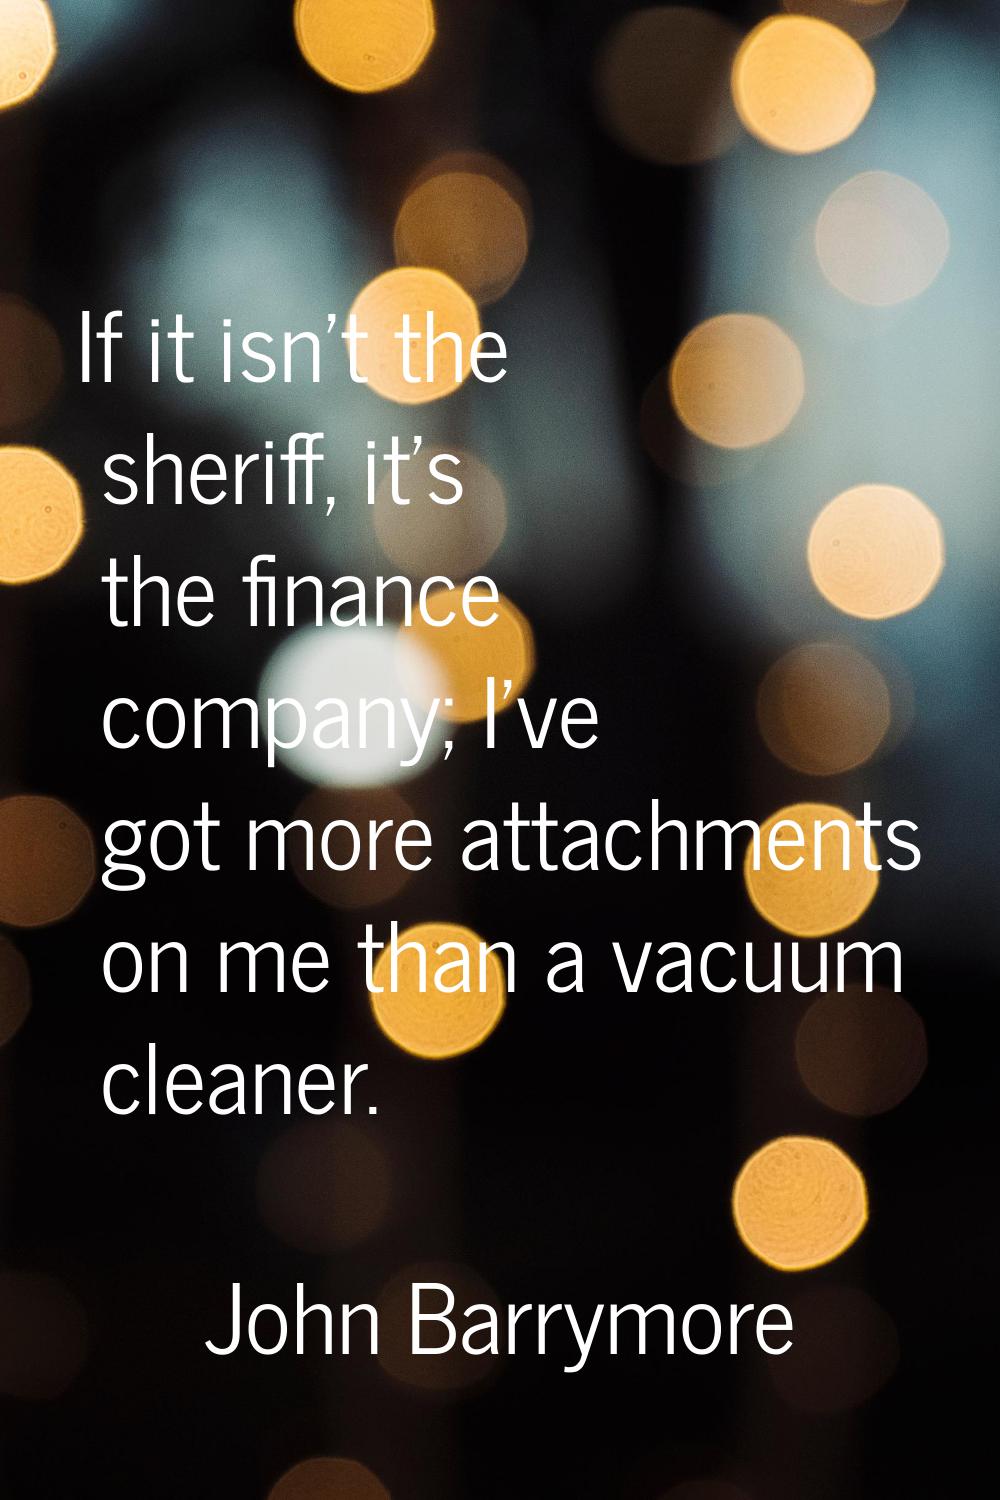 If it isn't the sheriff, it's the finance company; I've got more attachments on me than a vacuum cl